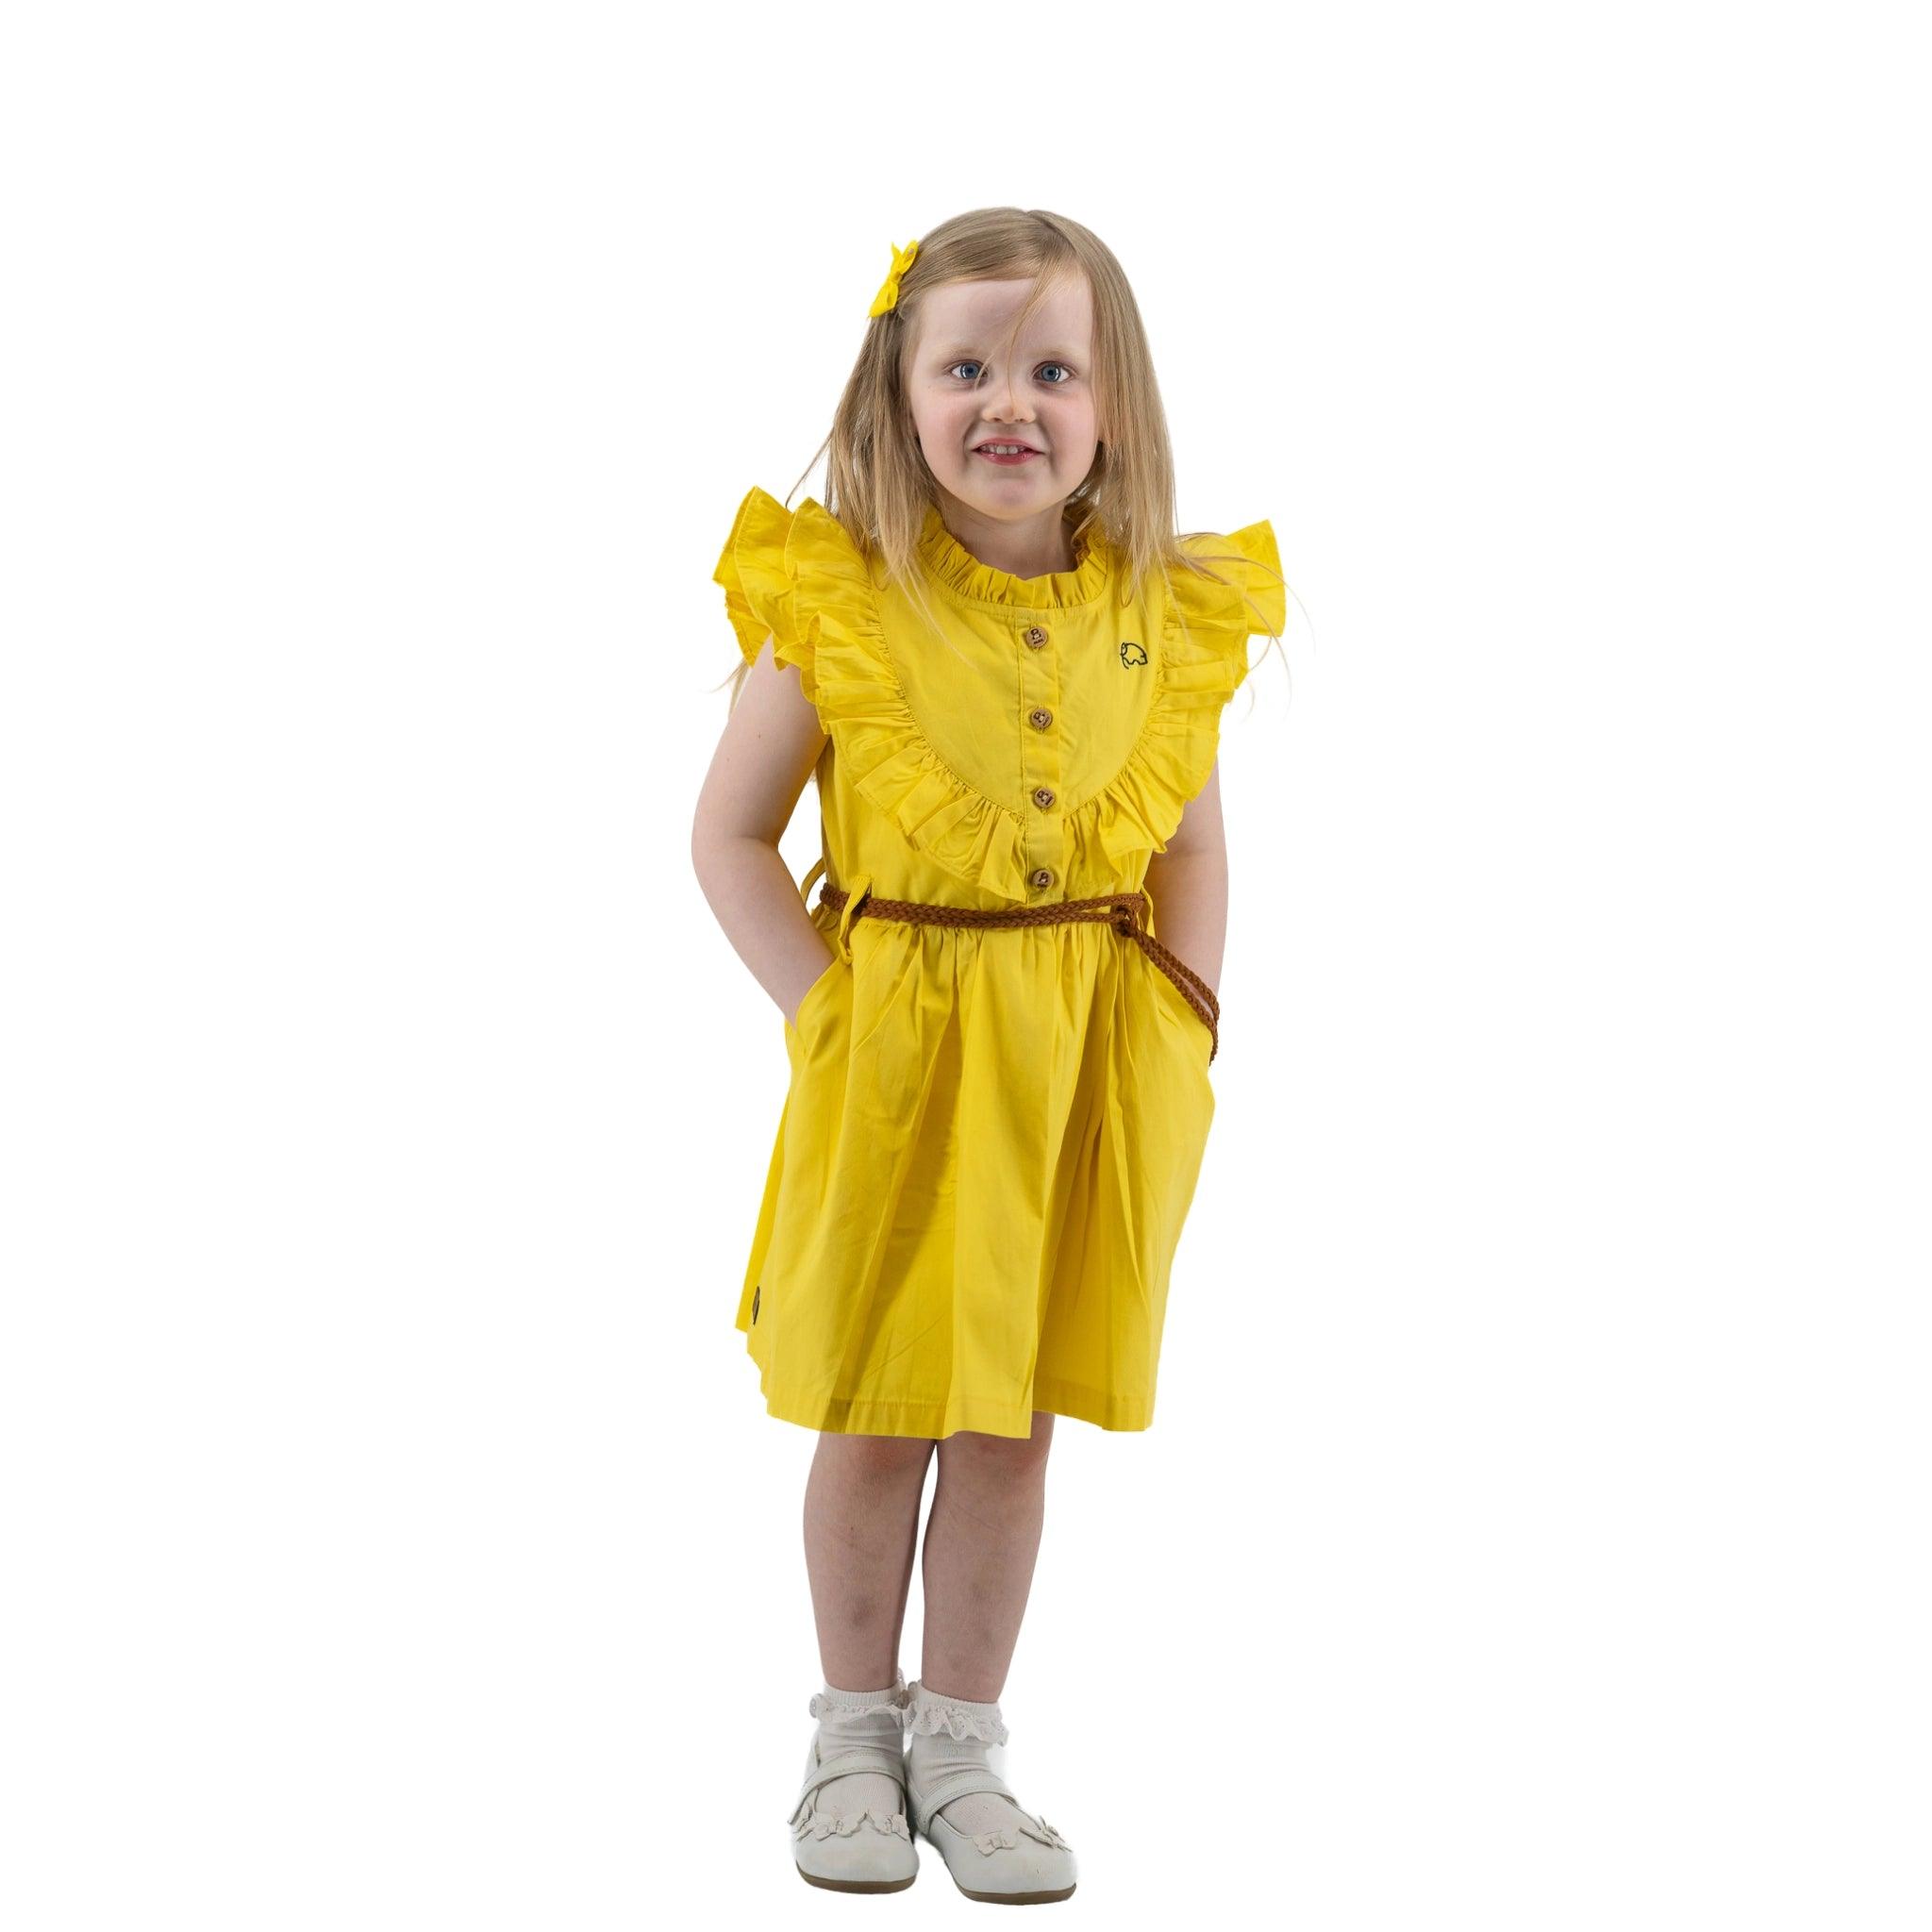 A young girl in a Karee yellow butterfly sleeve cotton dress and white sneakers stands with hands on hips, smiling at the camera on a white background.